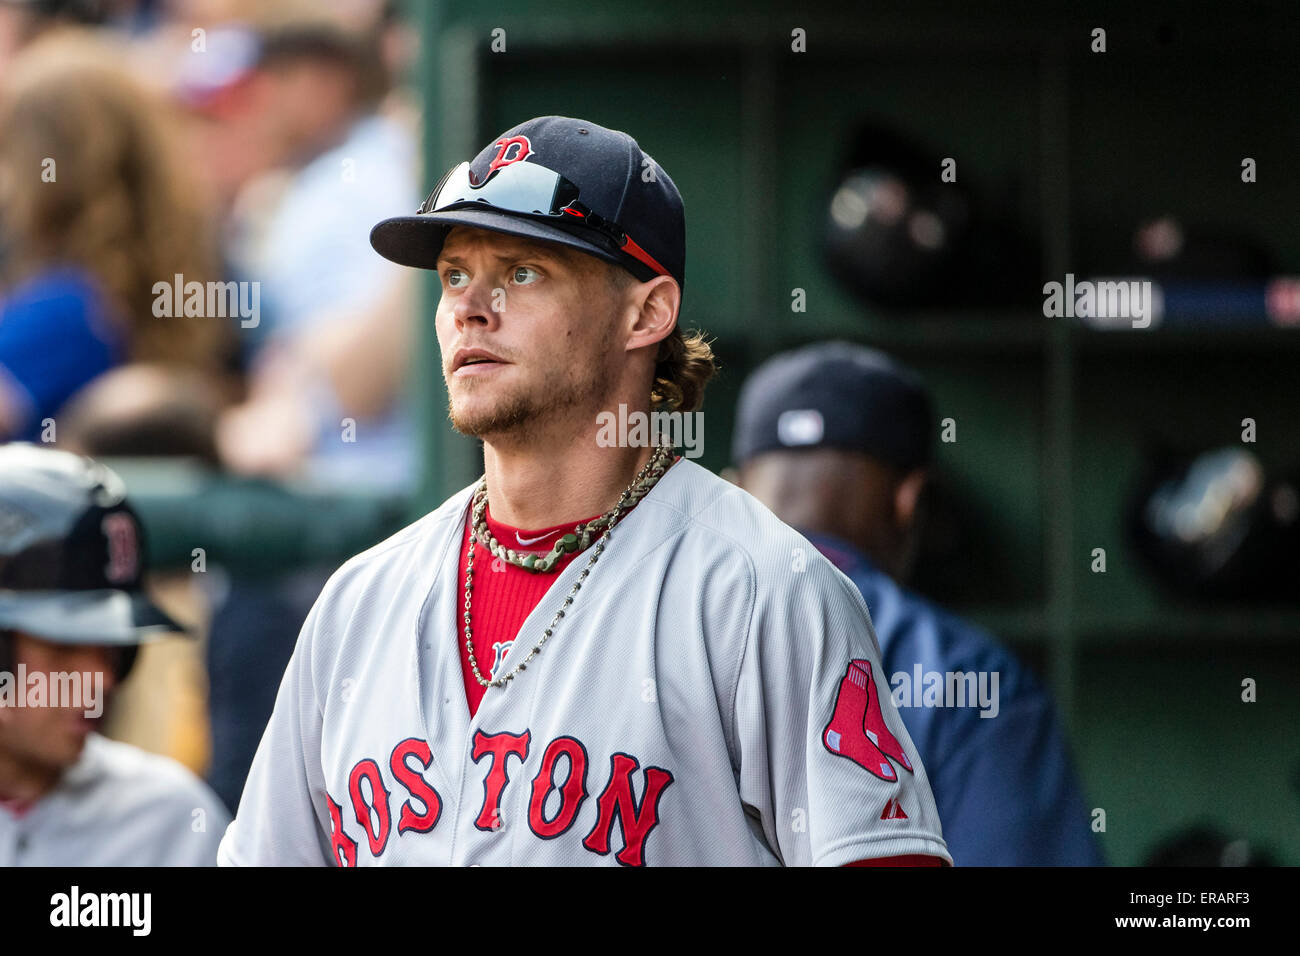 Arlington, Texas, USA. 30th May, 2015. Boston Red Sox starting pitcher Clay Buchholz (11) in the dugout during the the Major League Baseball game between the Boston Red Sox and the Texas Rangers at Globe Life Park in Arlington, Texas. Tim Warner/CSM/Alamy Live News Stock Photo